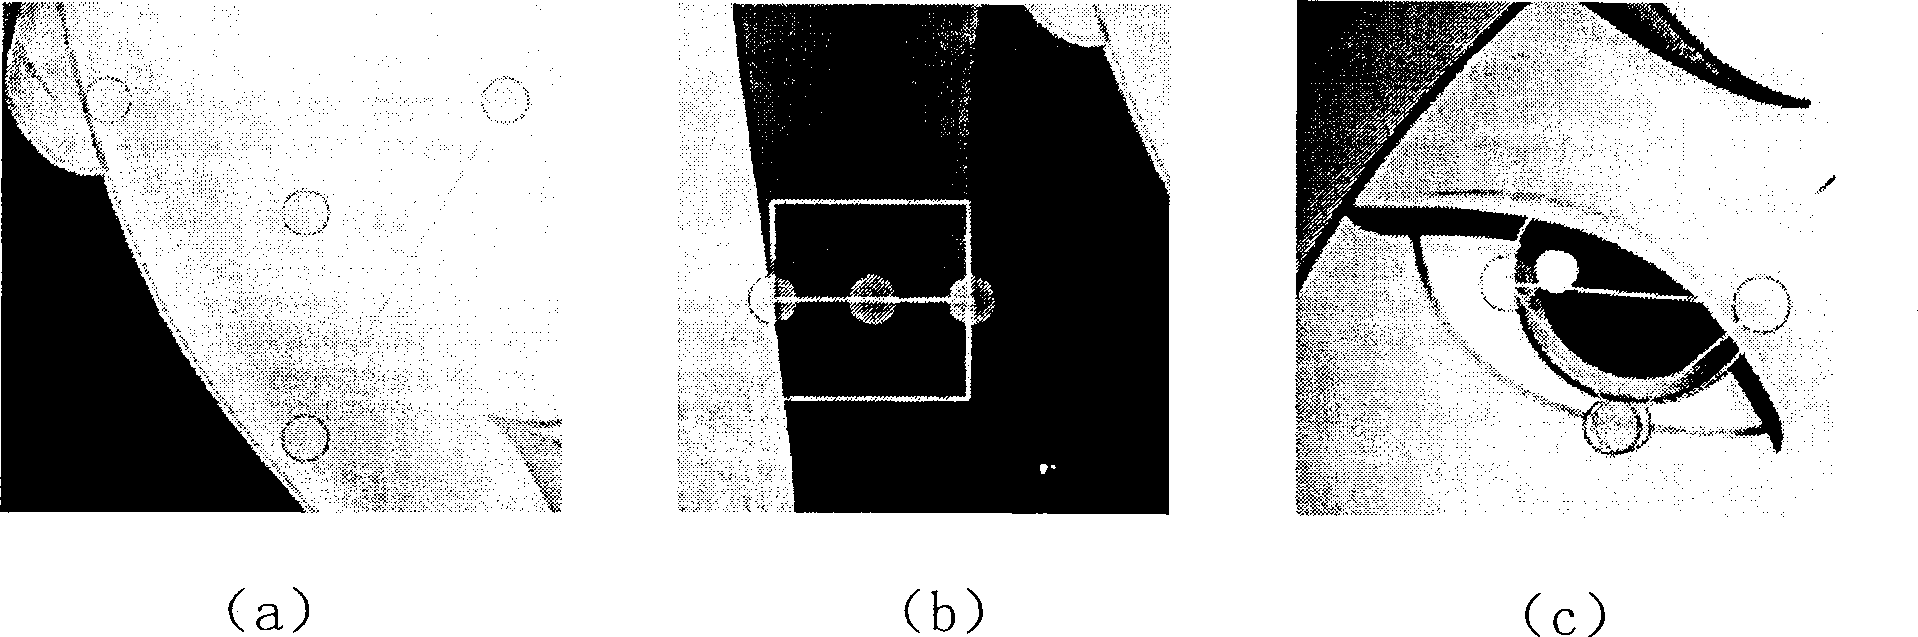 Computer assisted character animation drawing method based on light irradiated ball model